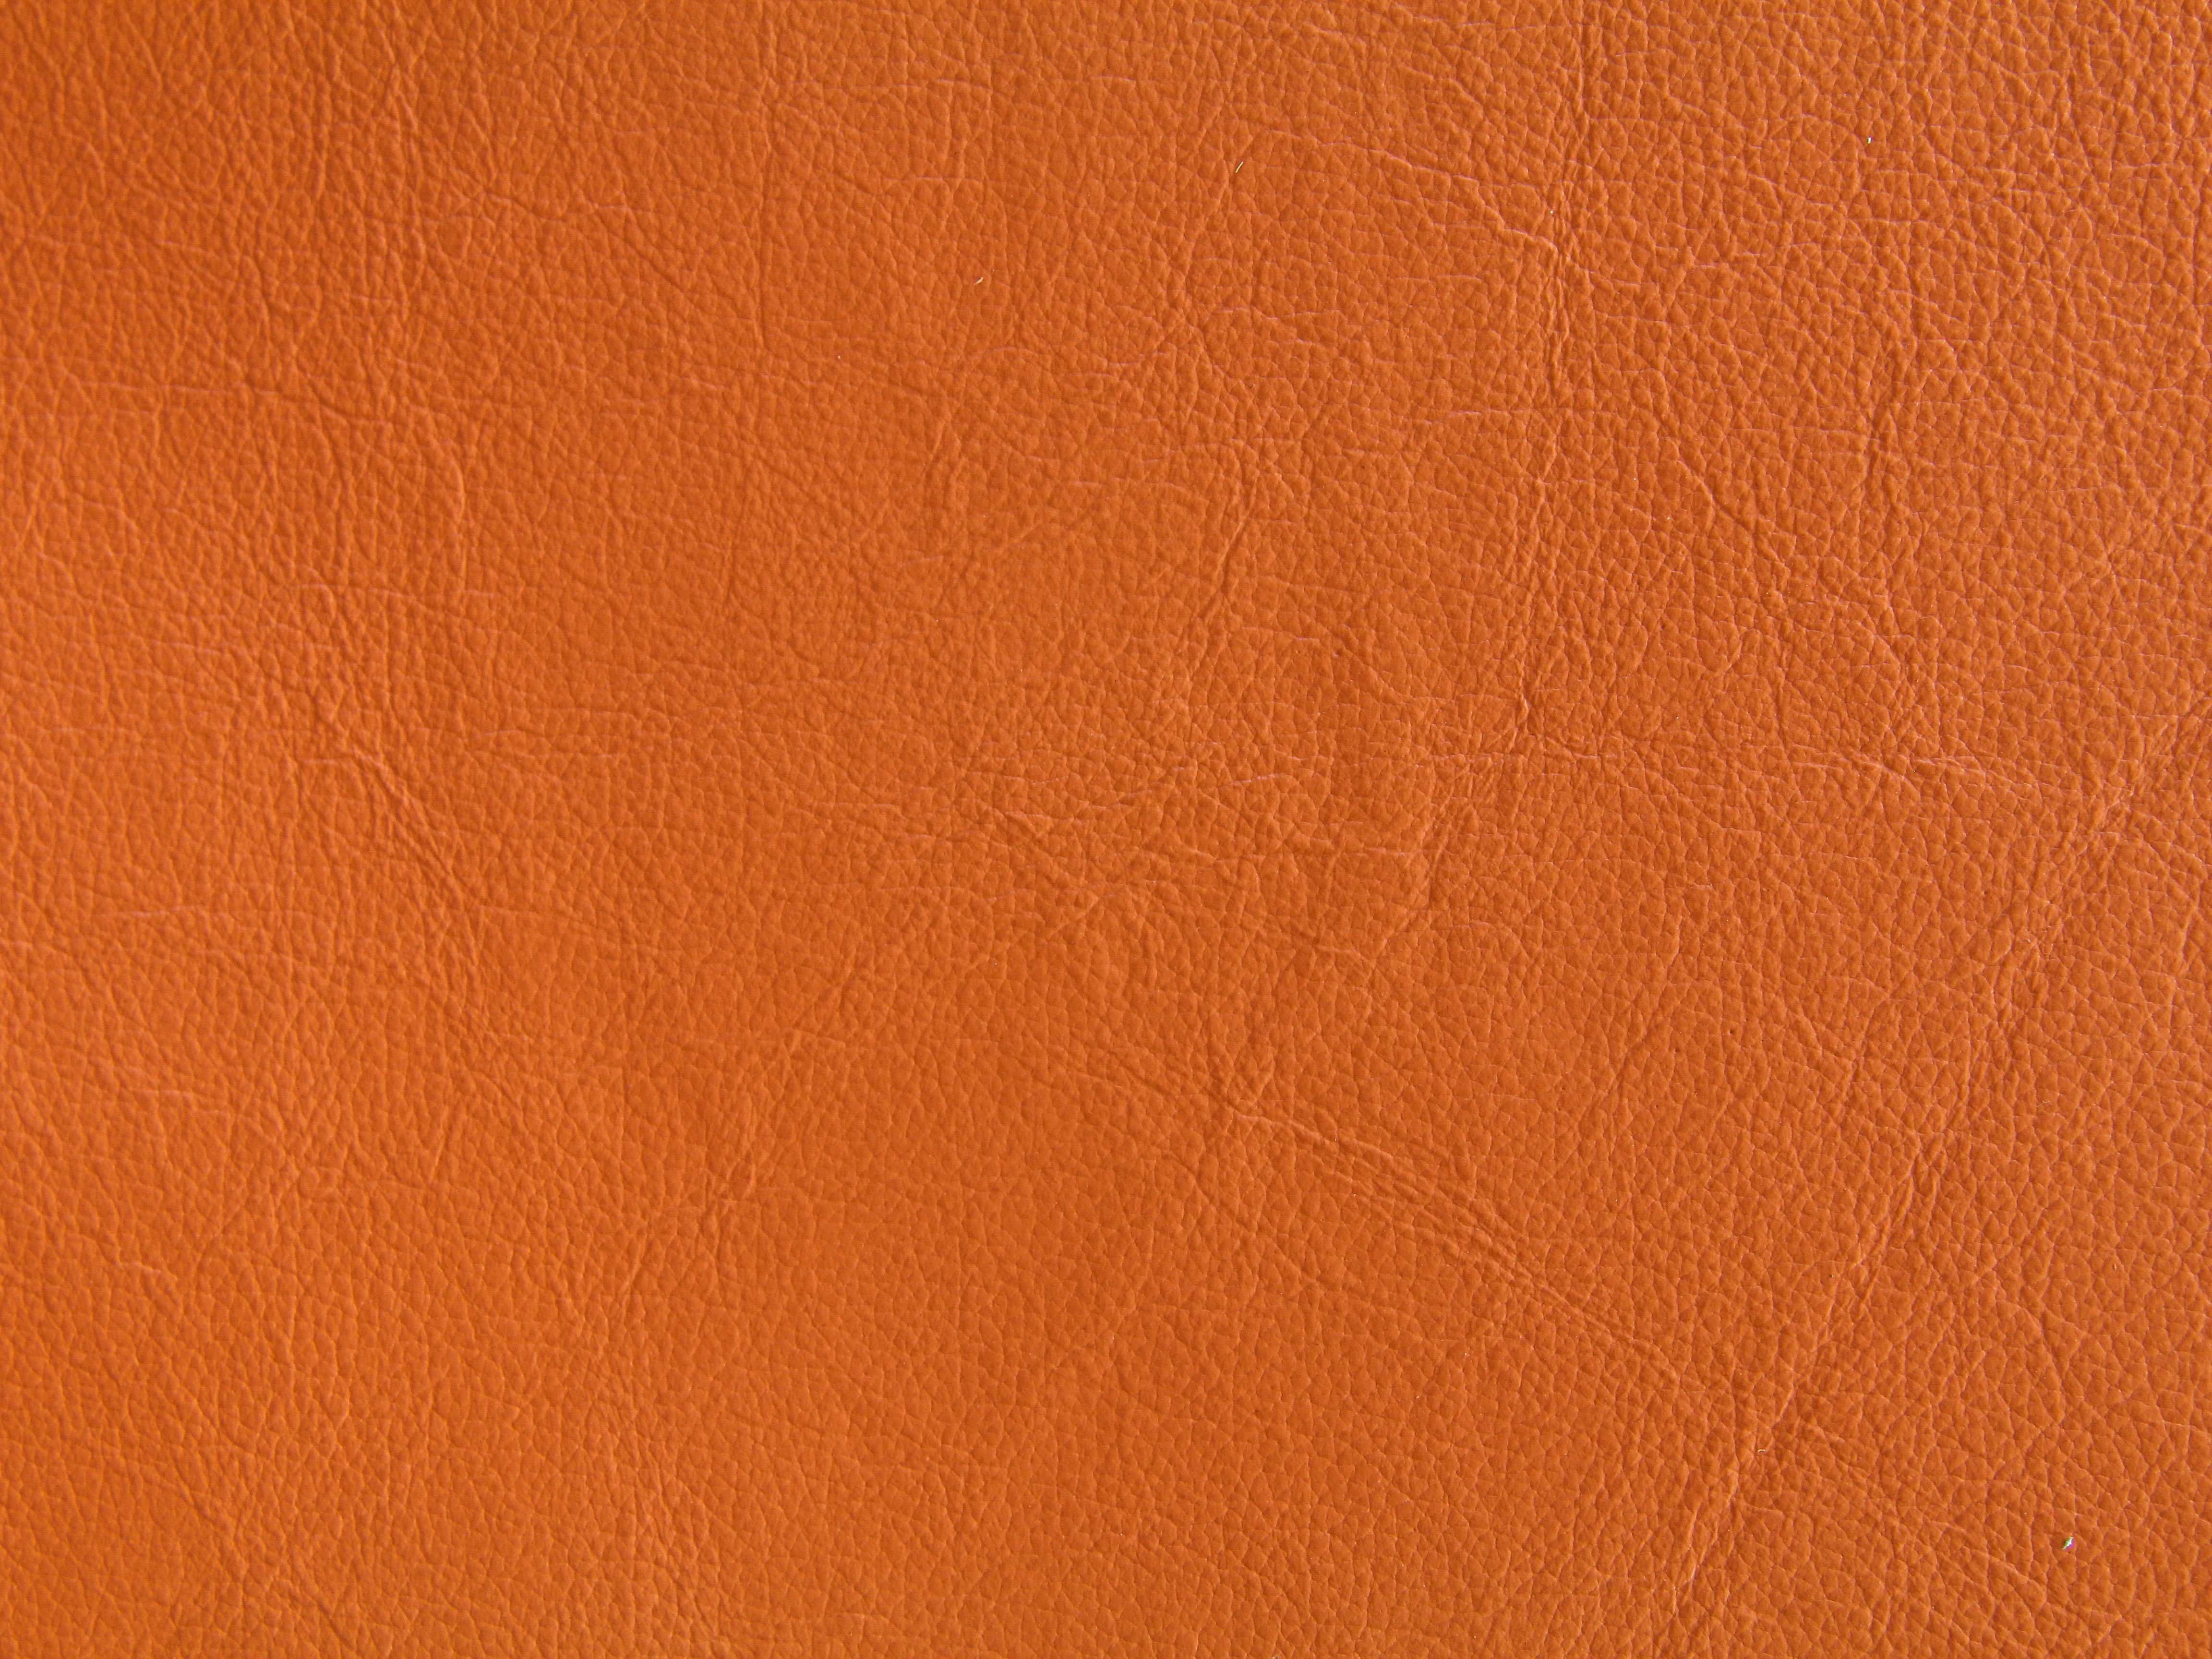 Free Leather Textures orange leather texture bright fabric wallpaper